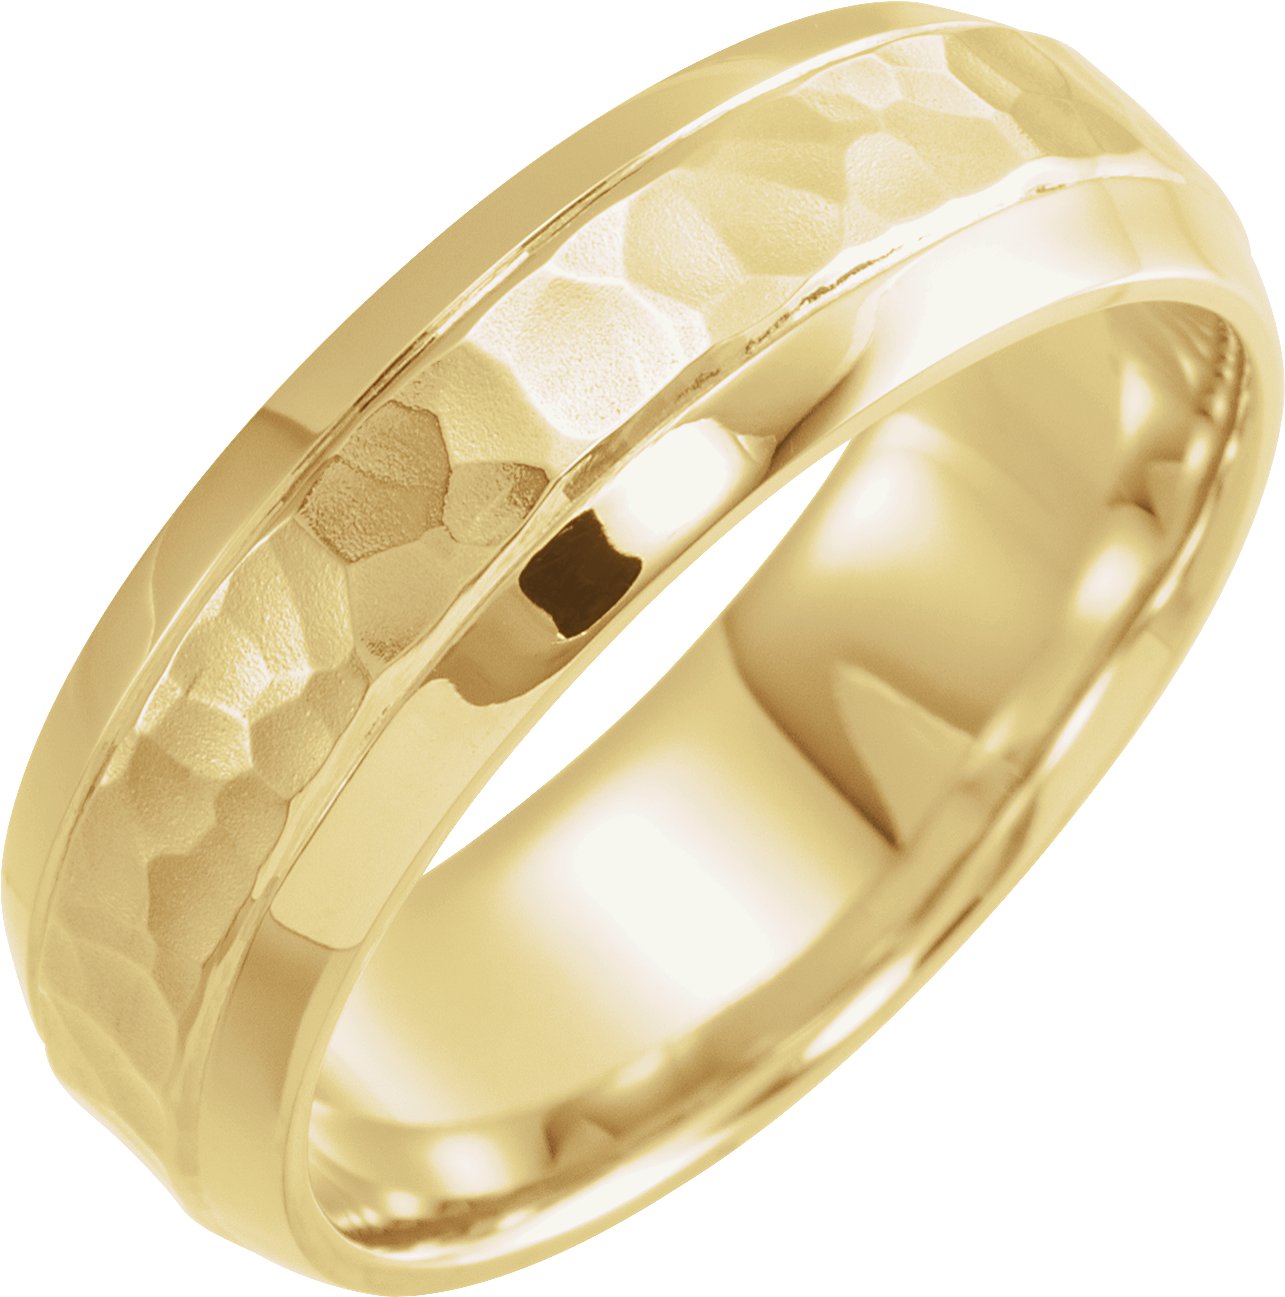 14K Yellow 7 mm Beveled-Edge Band with Hammered Texture Size 11